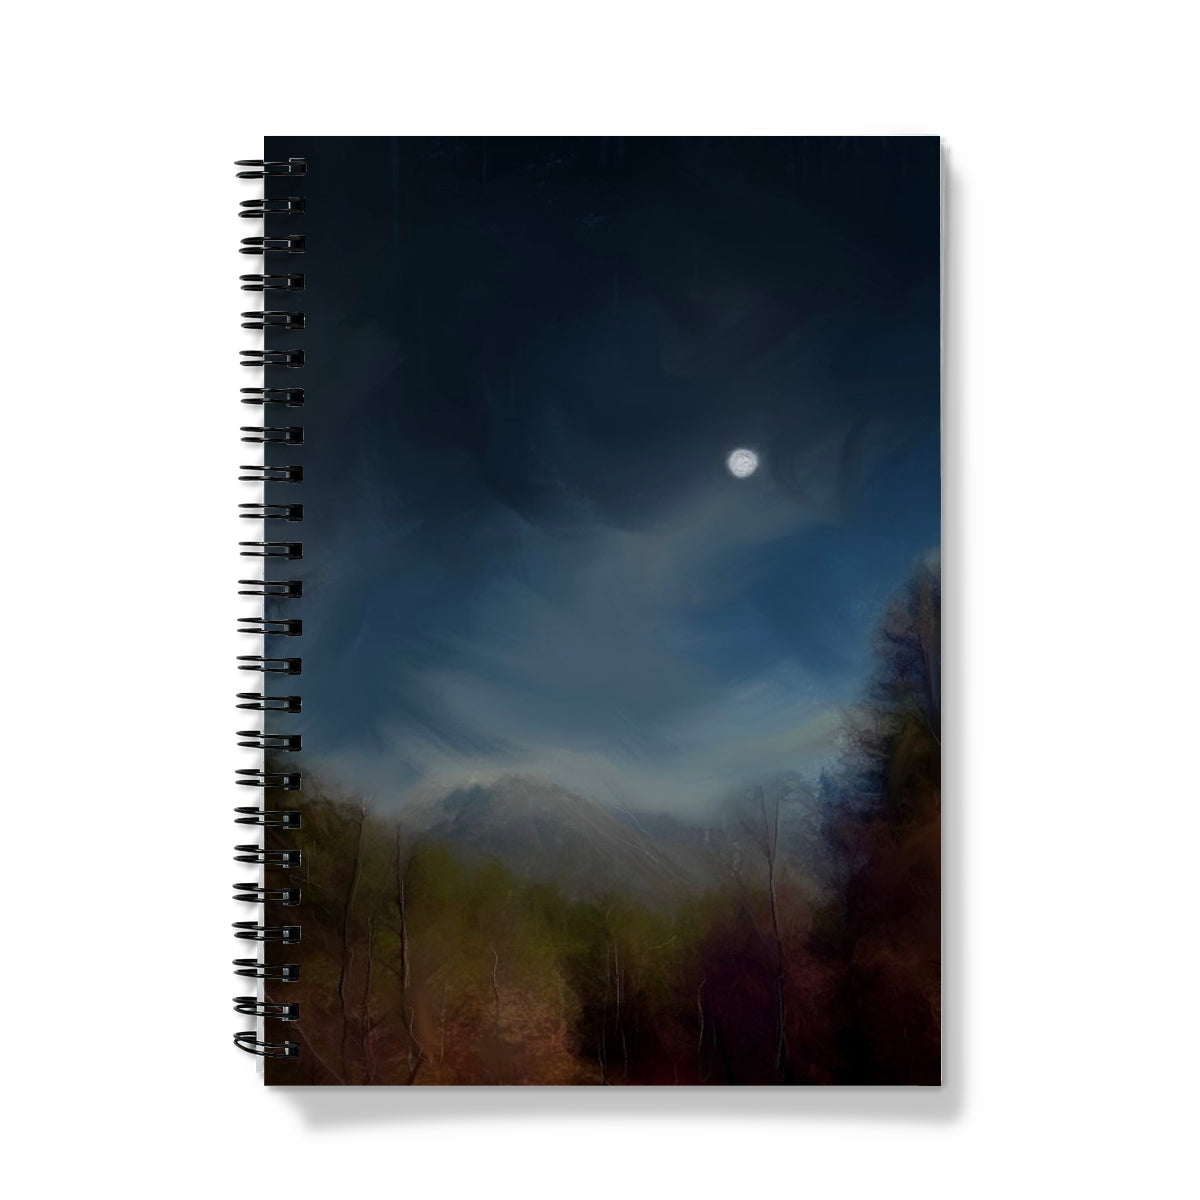 Glencoe Lochan Moonlight Art Gifts Notebook-Journals & Notebooks-Scottish Lochs & Mountains Art Gallery-A4-Lined-Paintings, Prints, Homeware, Art Gifts From Scotland By Scottish Artist Kevin Hunter